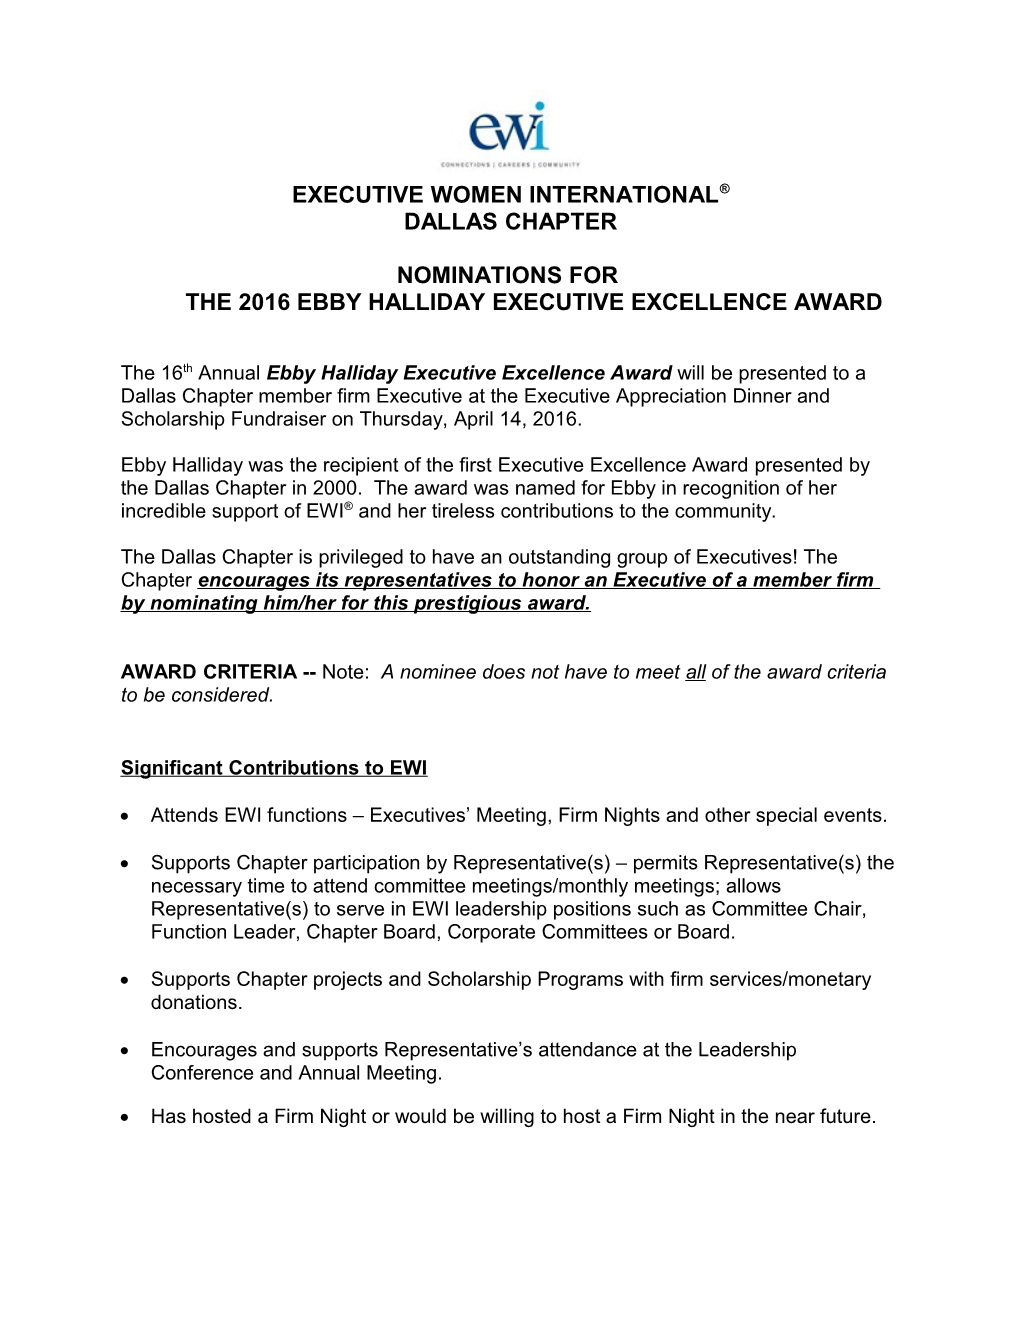 Nominations for the 2016 Ebby Halliday Executive Excellence Award